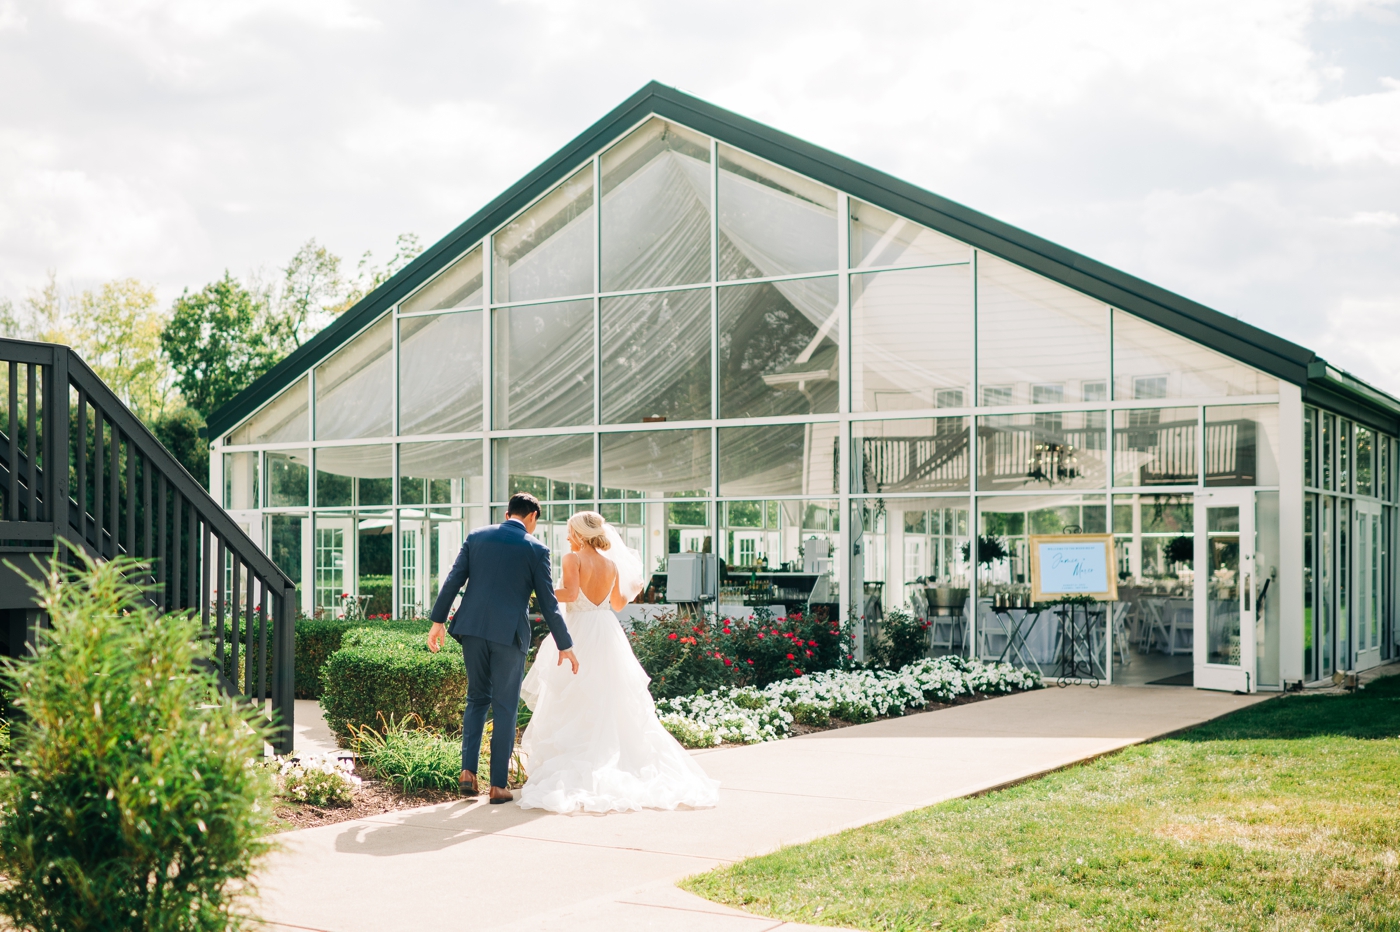 Bride and groom walking into Garden Pavilion for their wedding reception